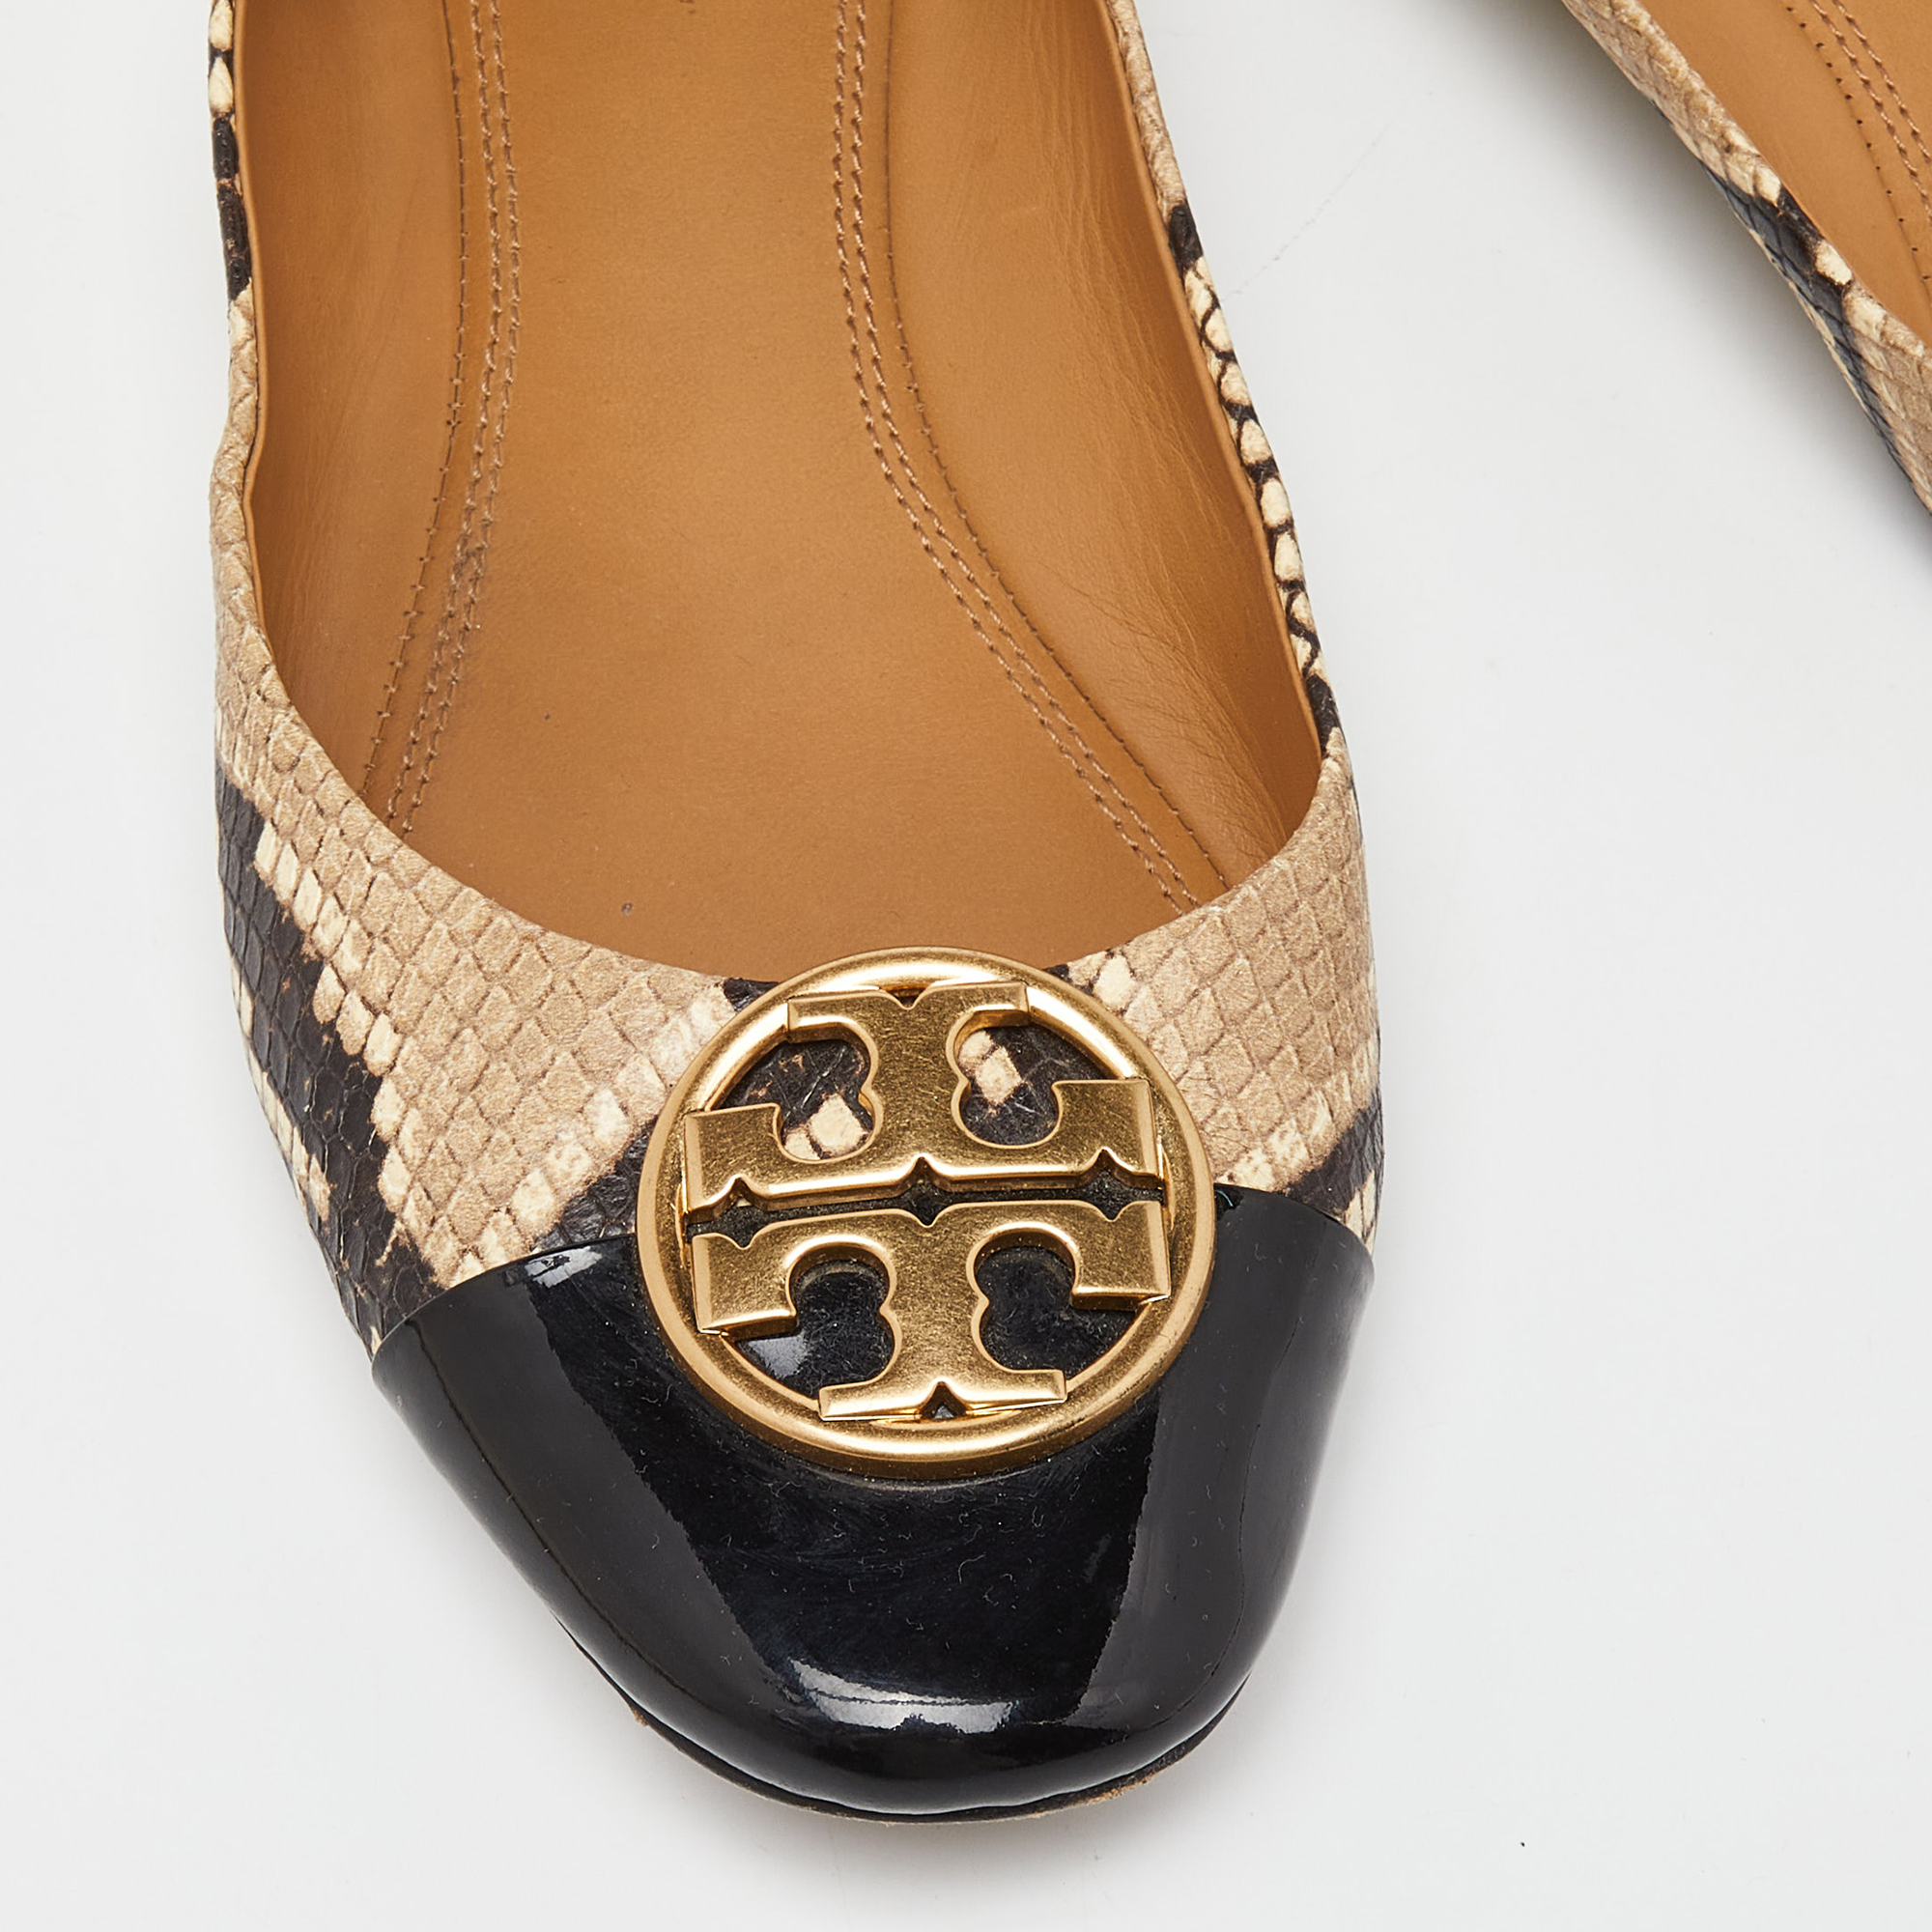 Tory Burch Beige/Brown Python Embossed Leather And Patent Leather Chelsea Ballet Flats Size 41